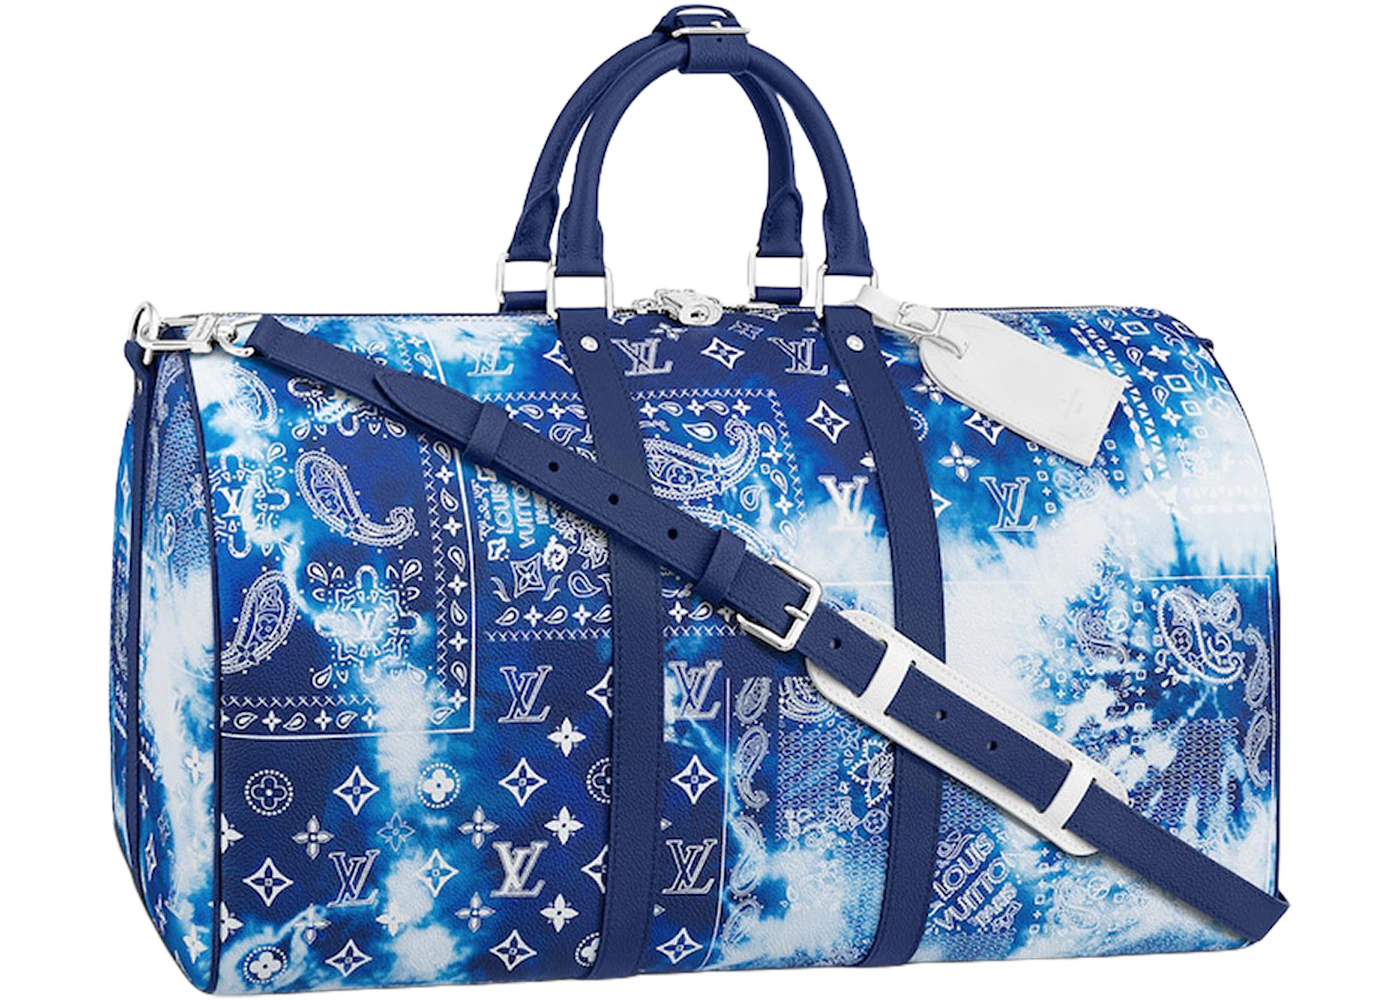 Louis Vuitton City Keepall Bag Limited Edition Monogram Watercolor